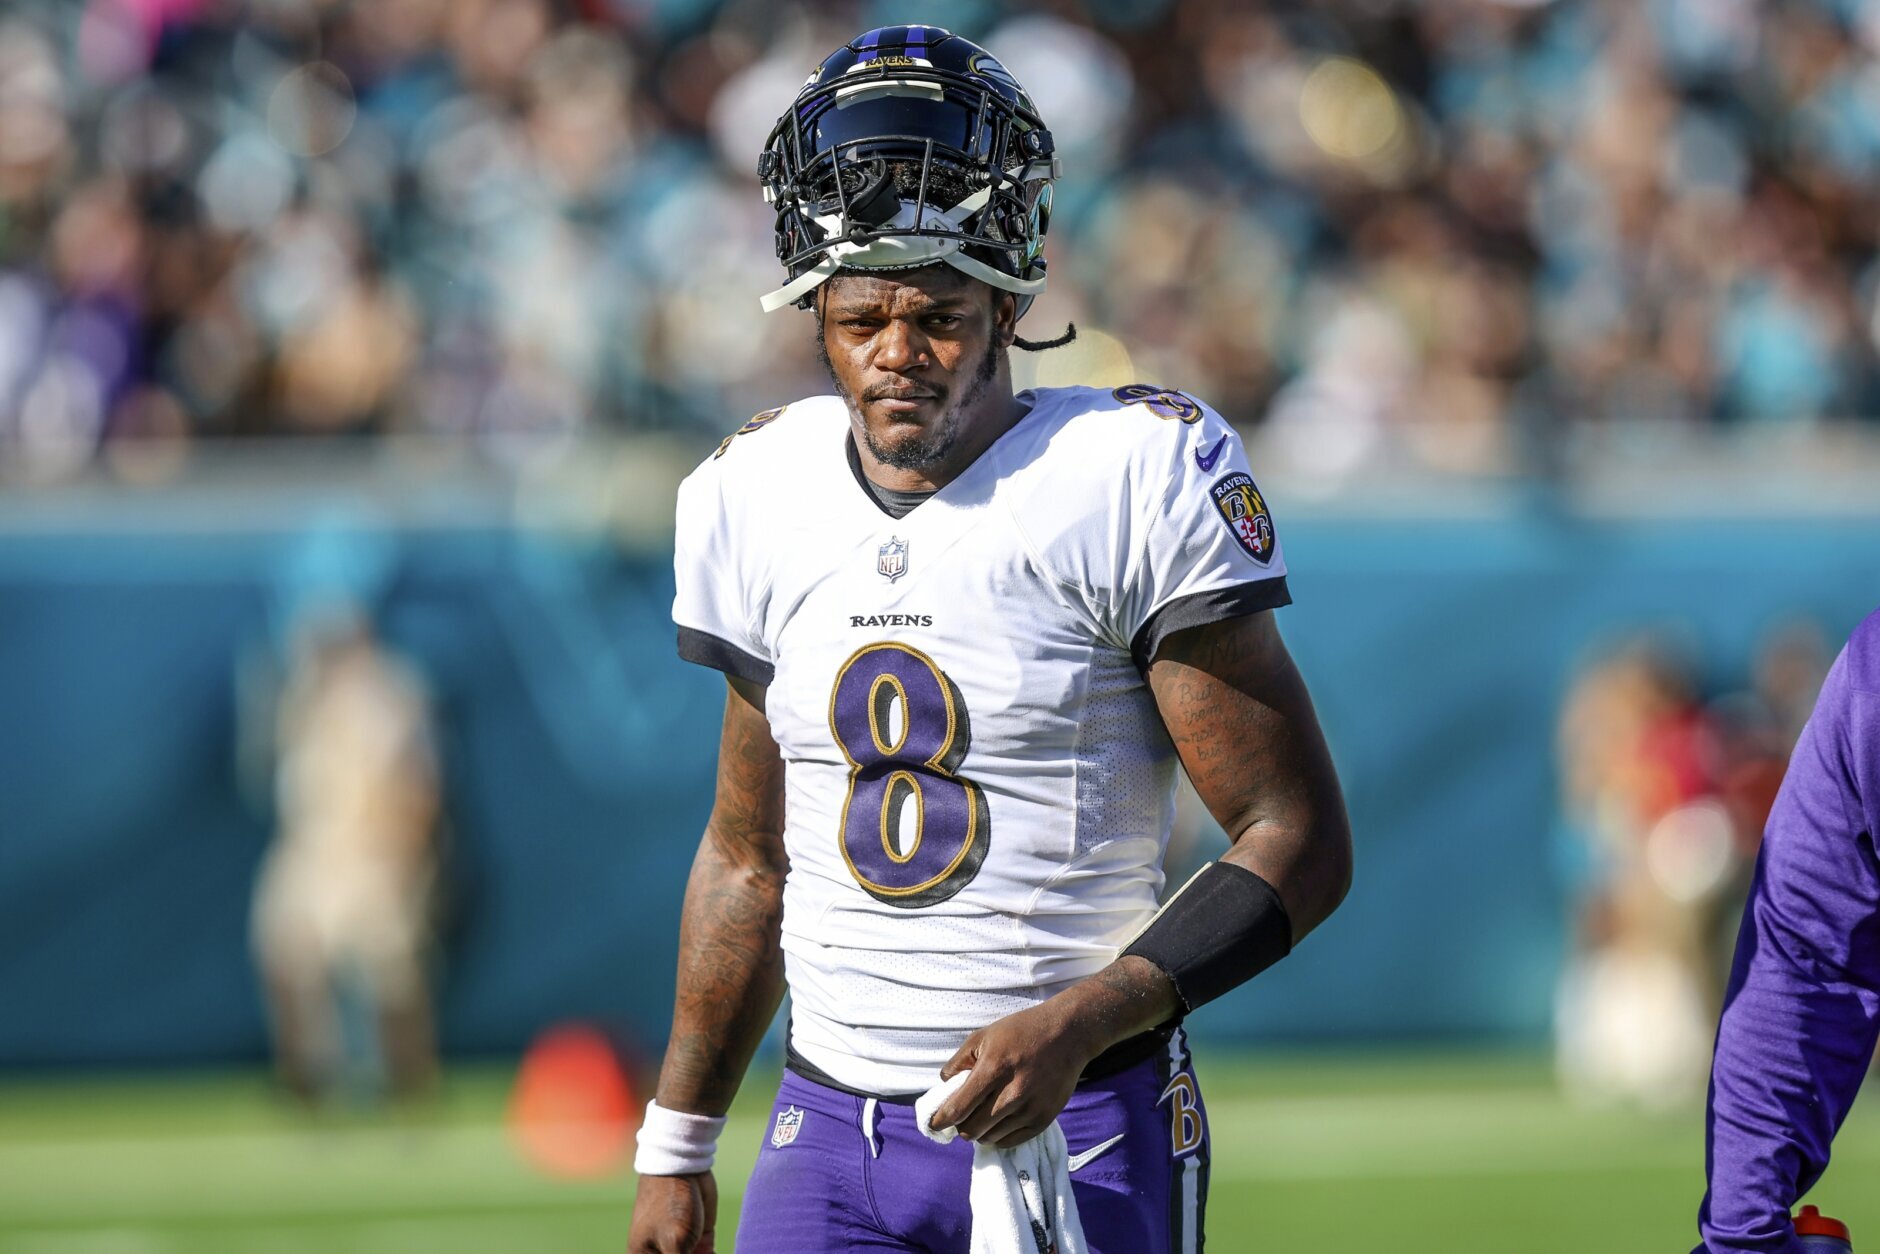 Off the field, Ravens' QB Lamar Jackson is one of Baltimore's most